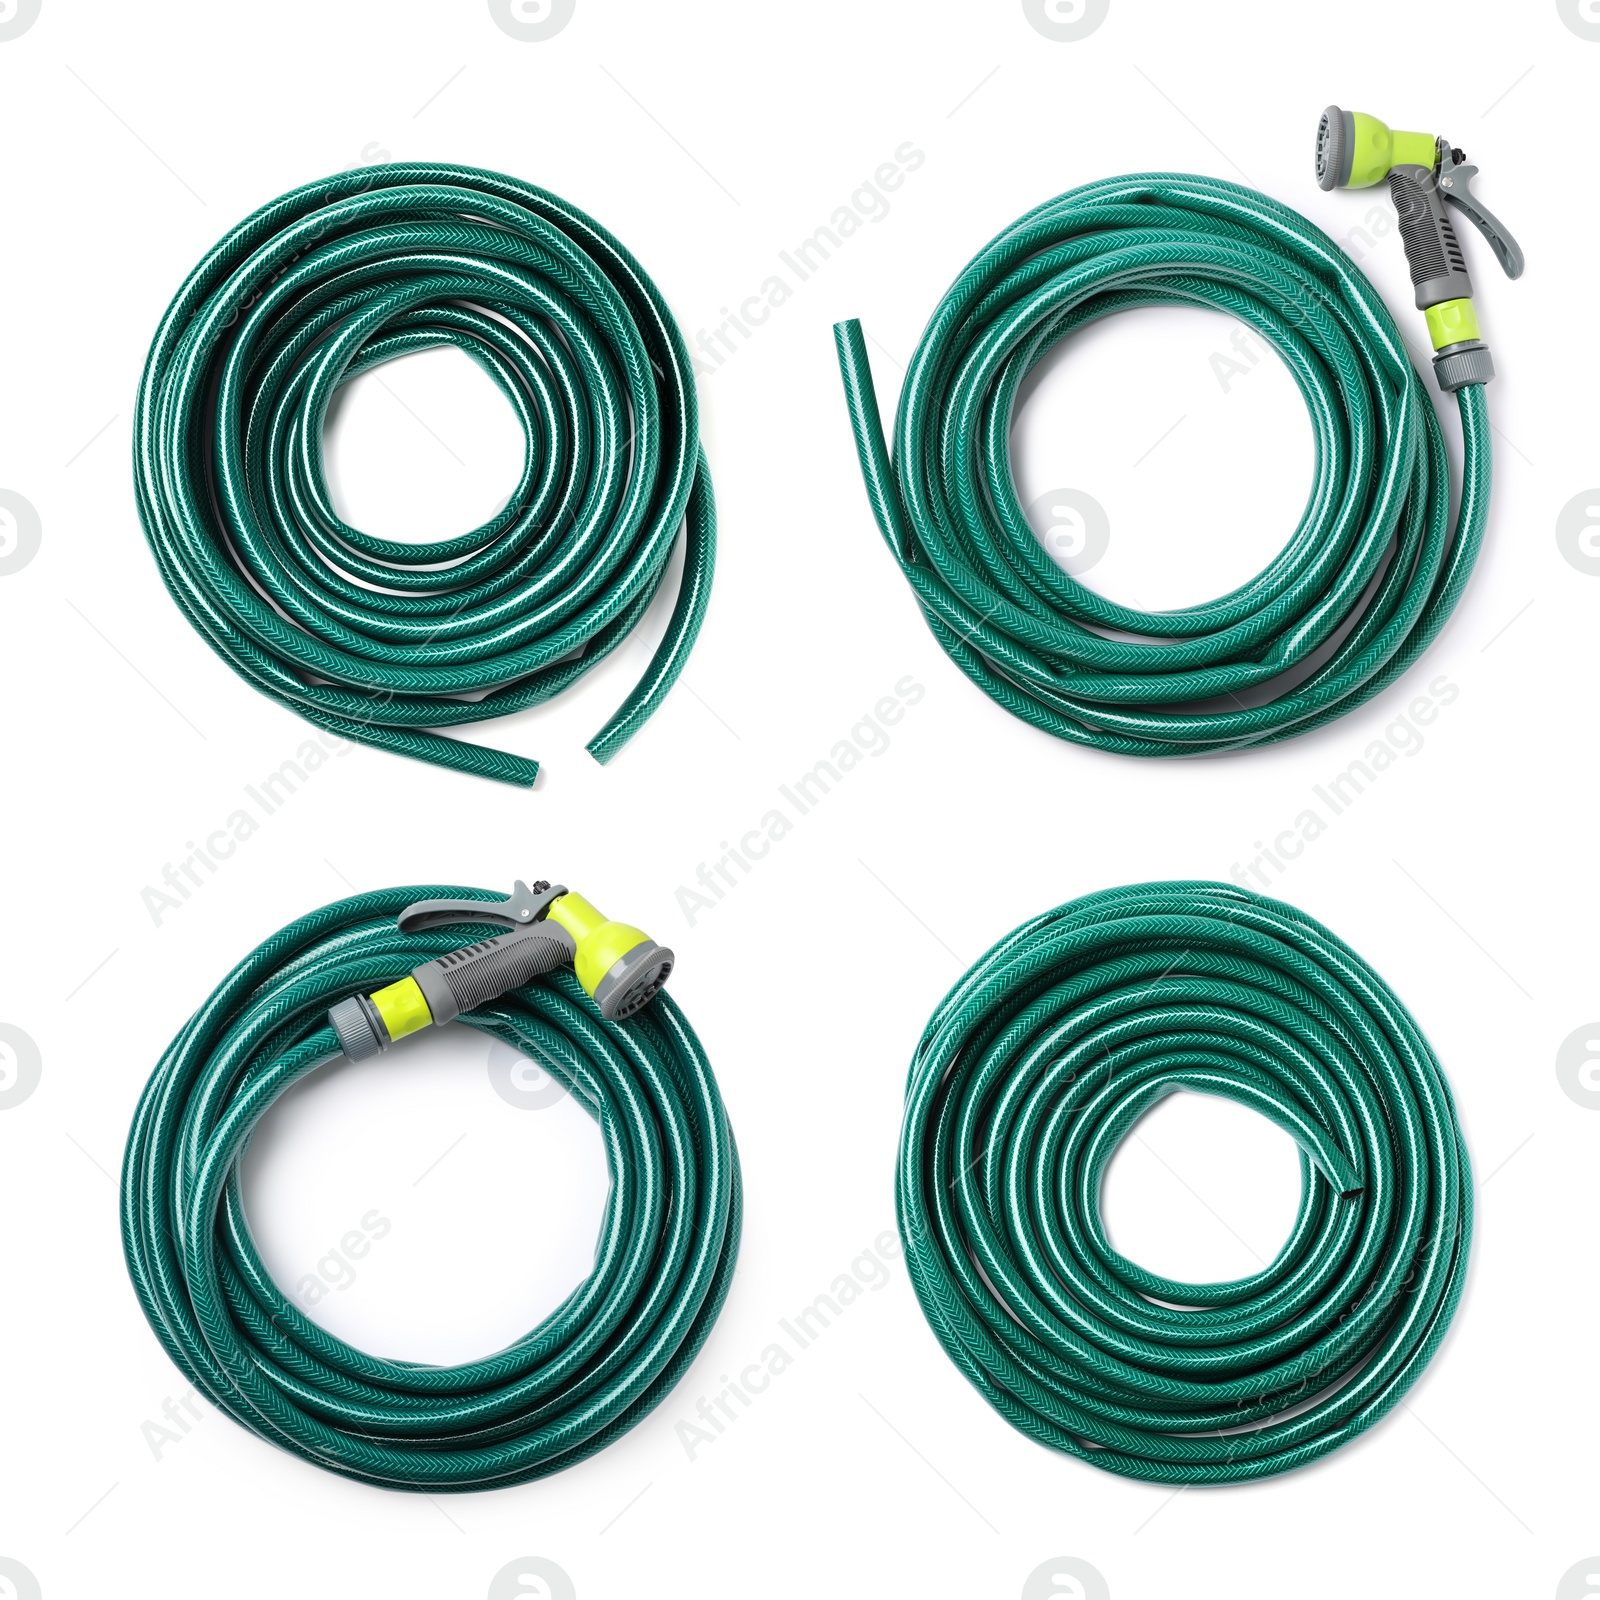 Image of Set with green rubber watering hoses on white background, top view